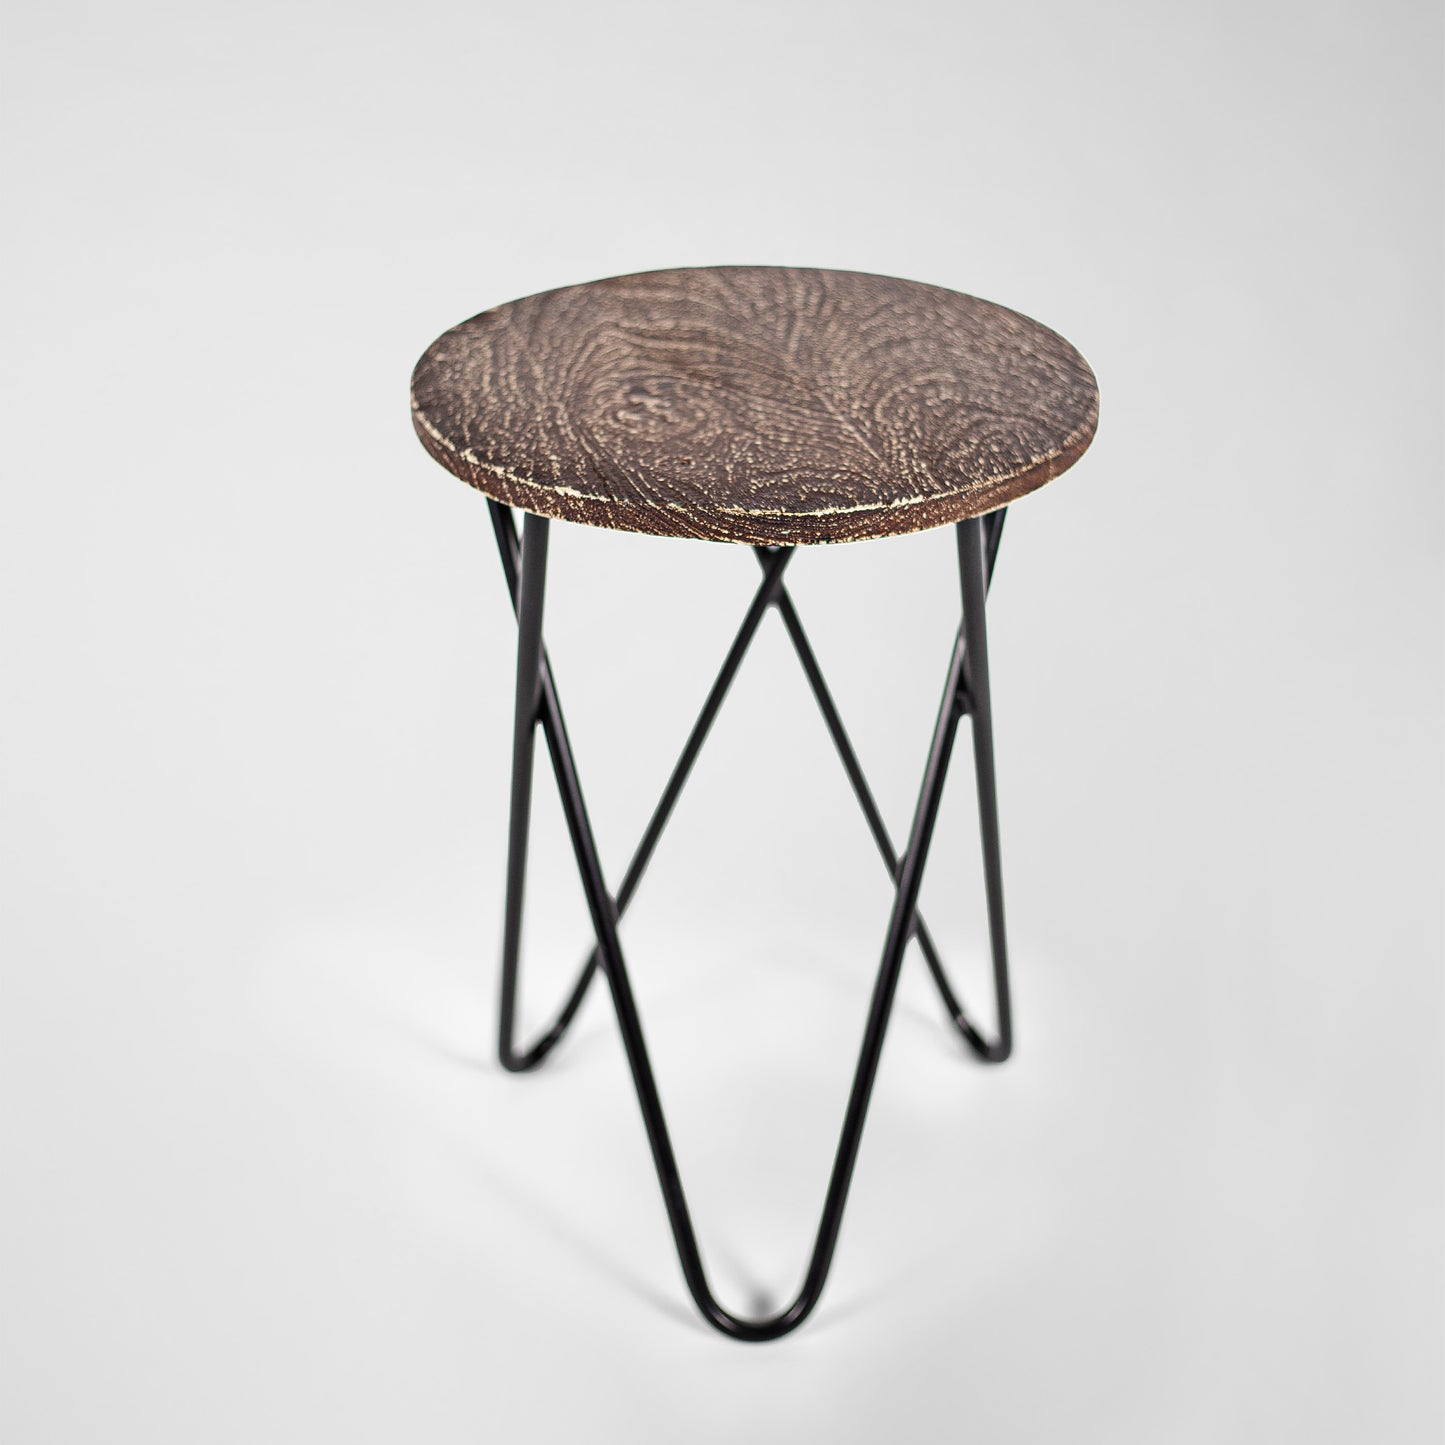 HairPin 104 – Handmade industrial design stool made of metal with wooden seat in black or white